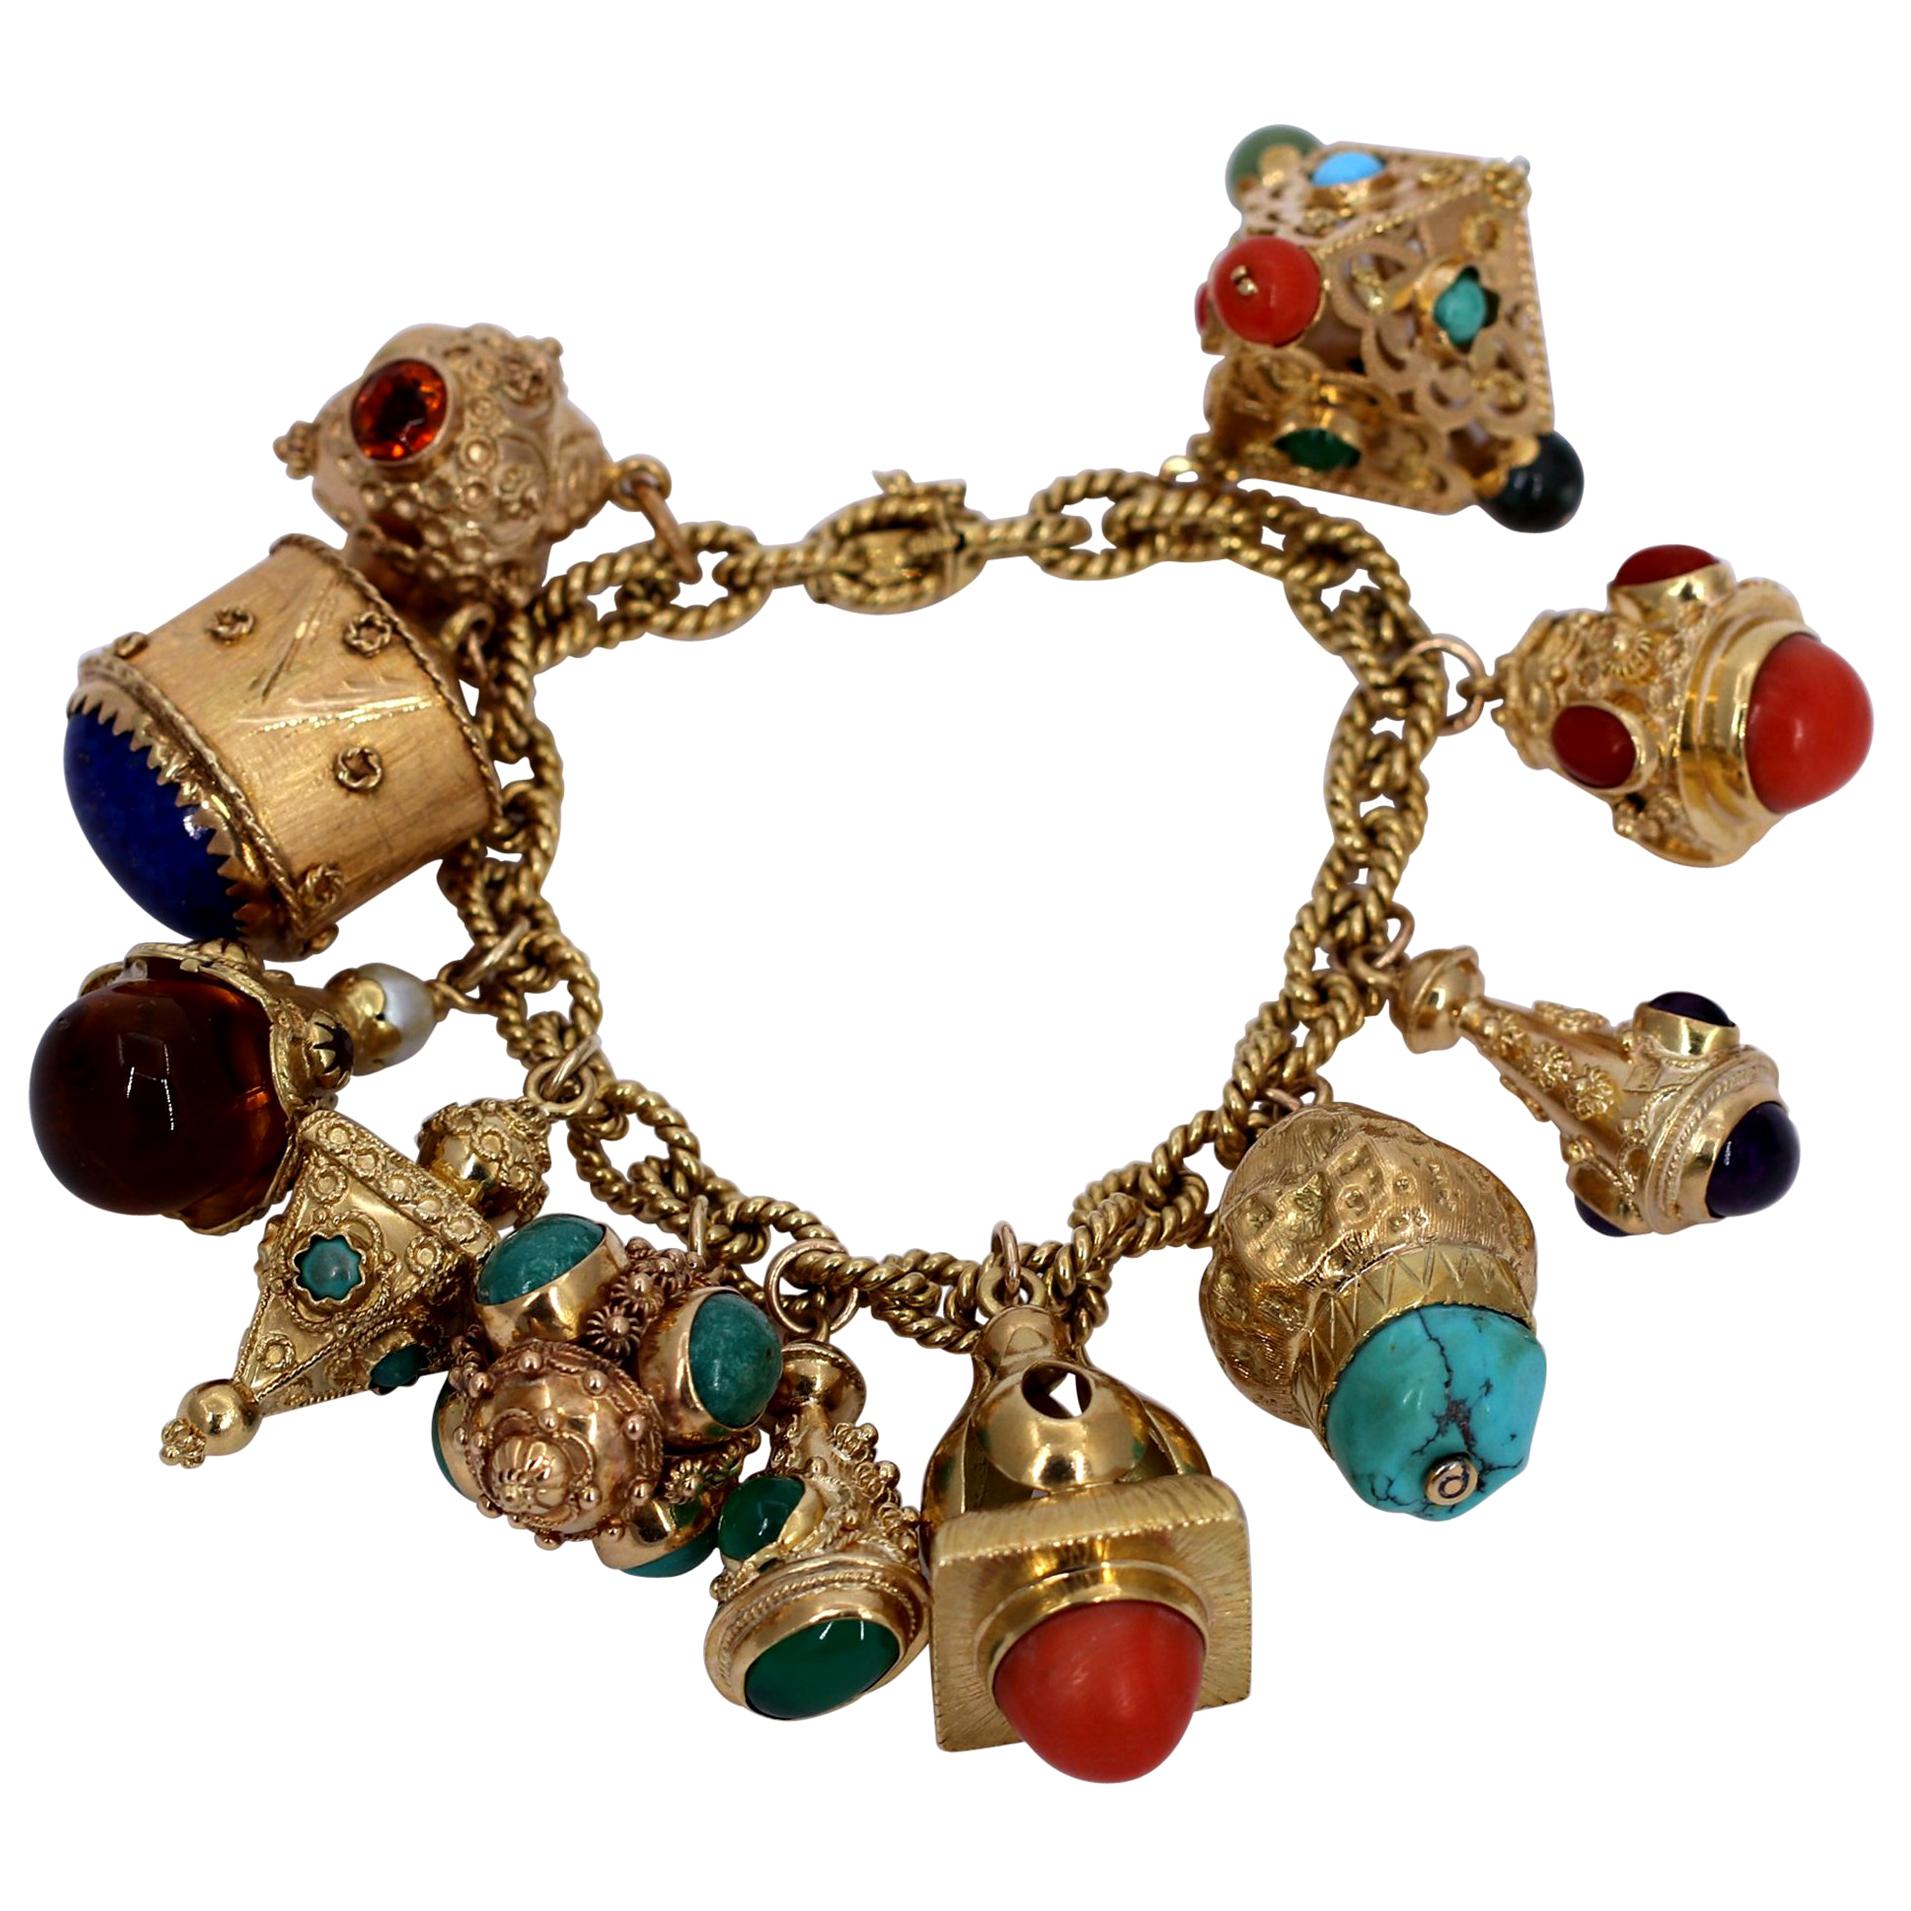 Gold Charm Bracelet with Eleven Charms with Assorted Stones